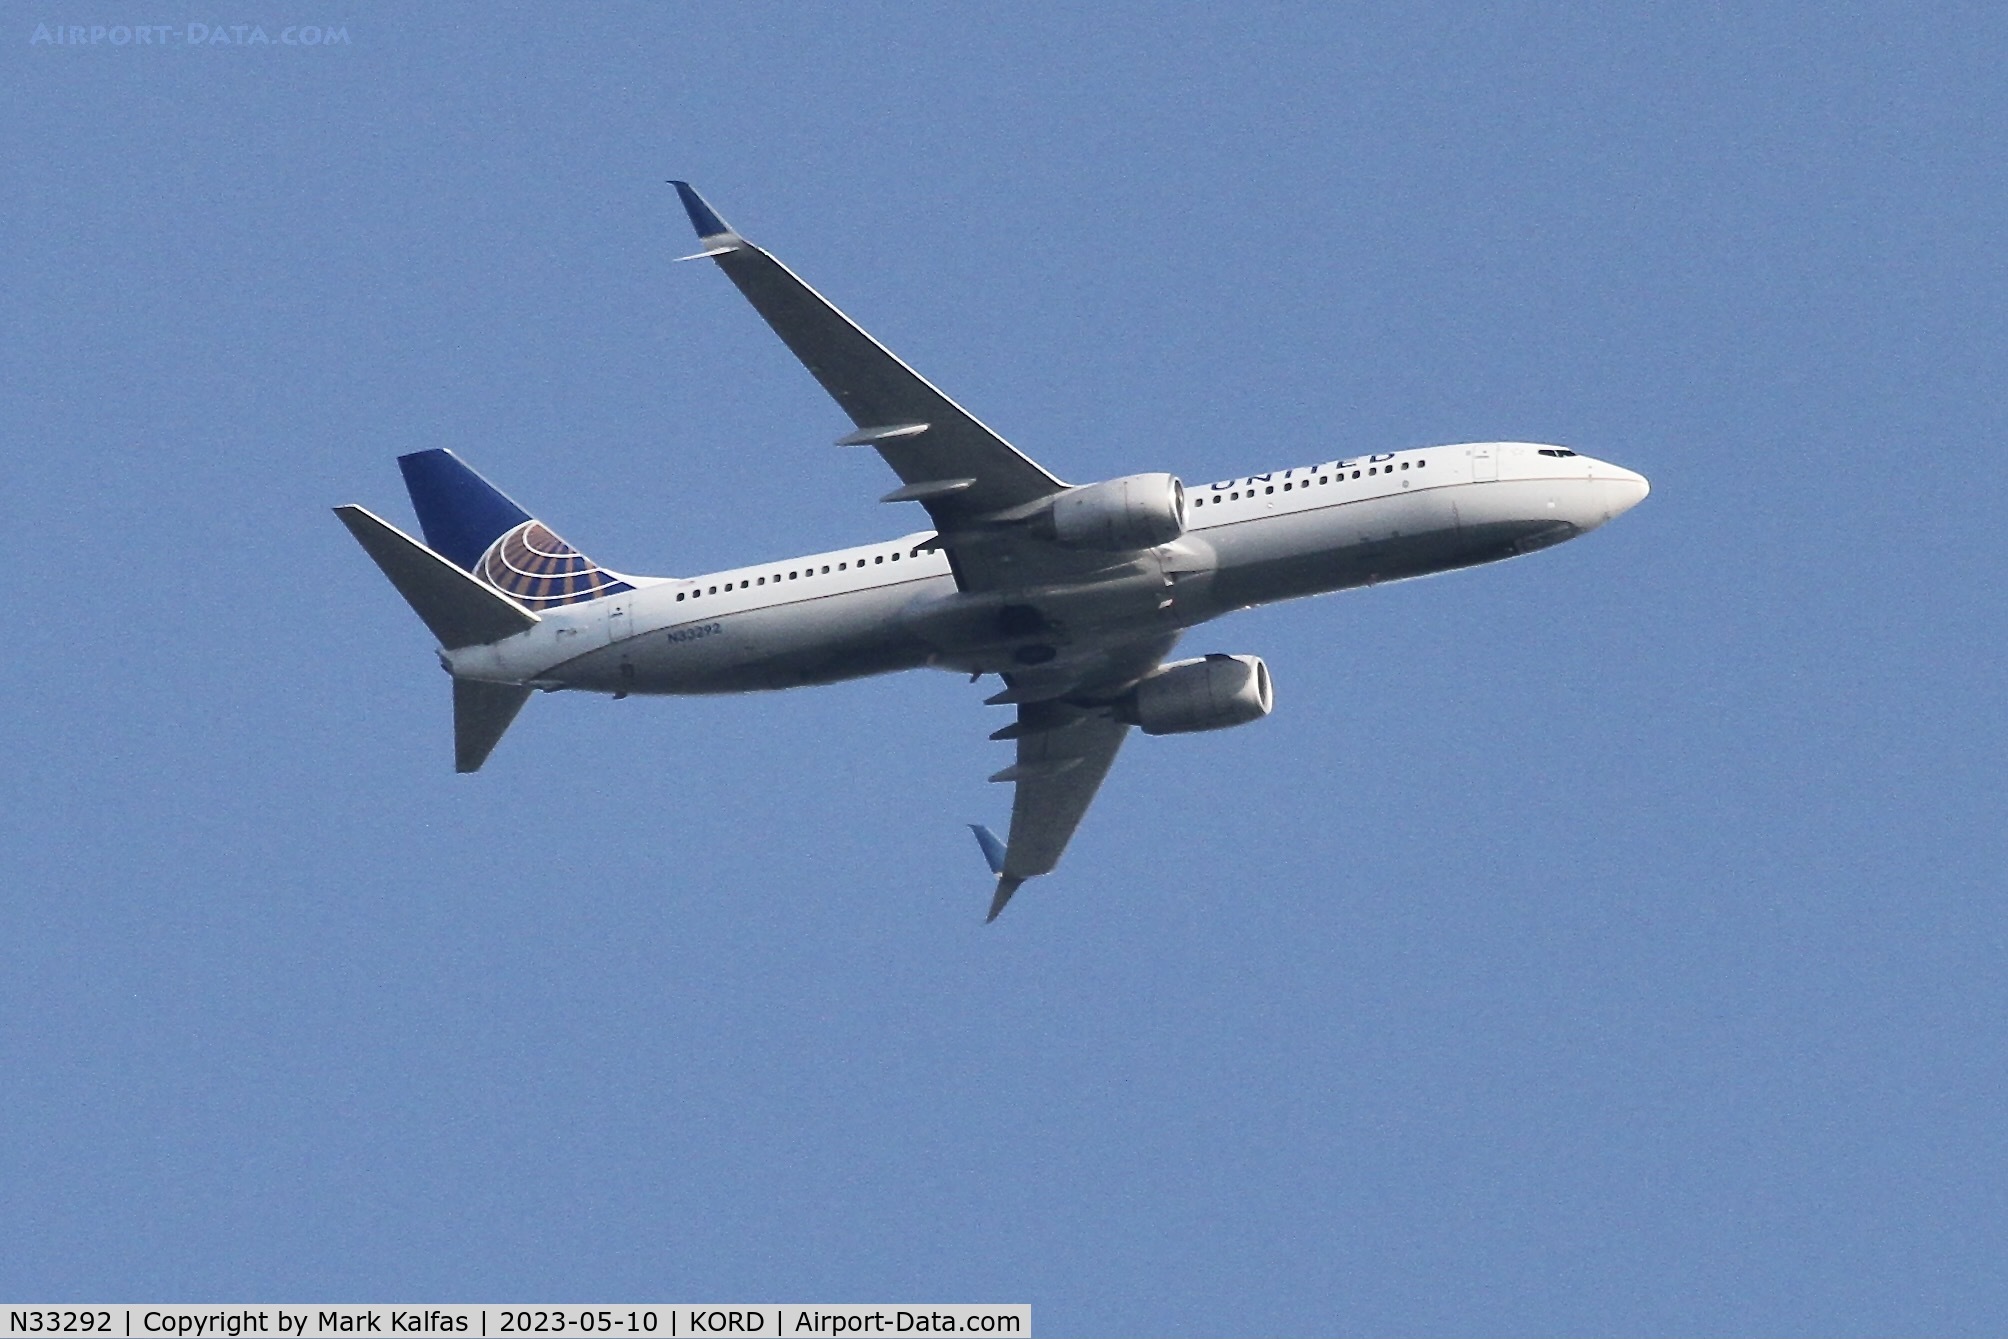 N33292, 2004 Boeing 737-824 C/N 33455, United Airlines Boeing 737-824, N33292 operating as  UA1154 DCA-ORD, on approach to O'Hare.